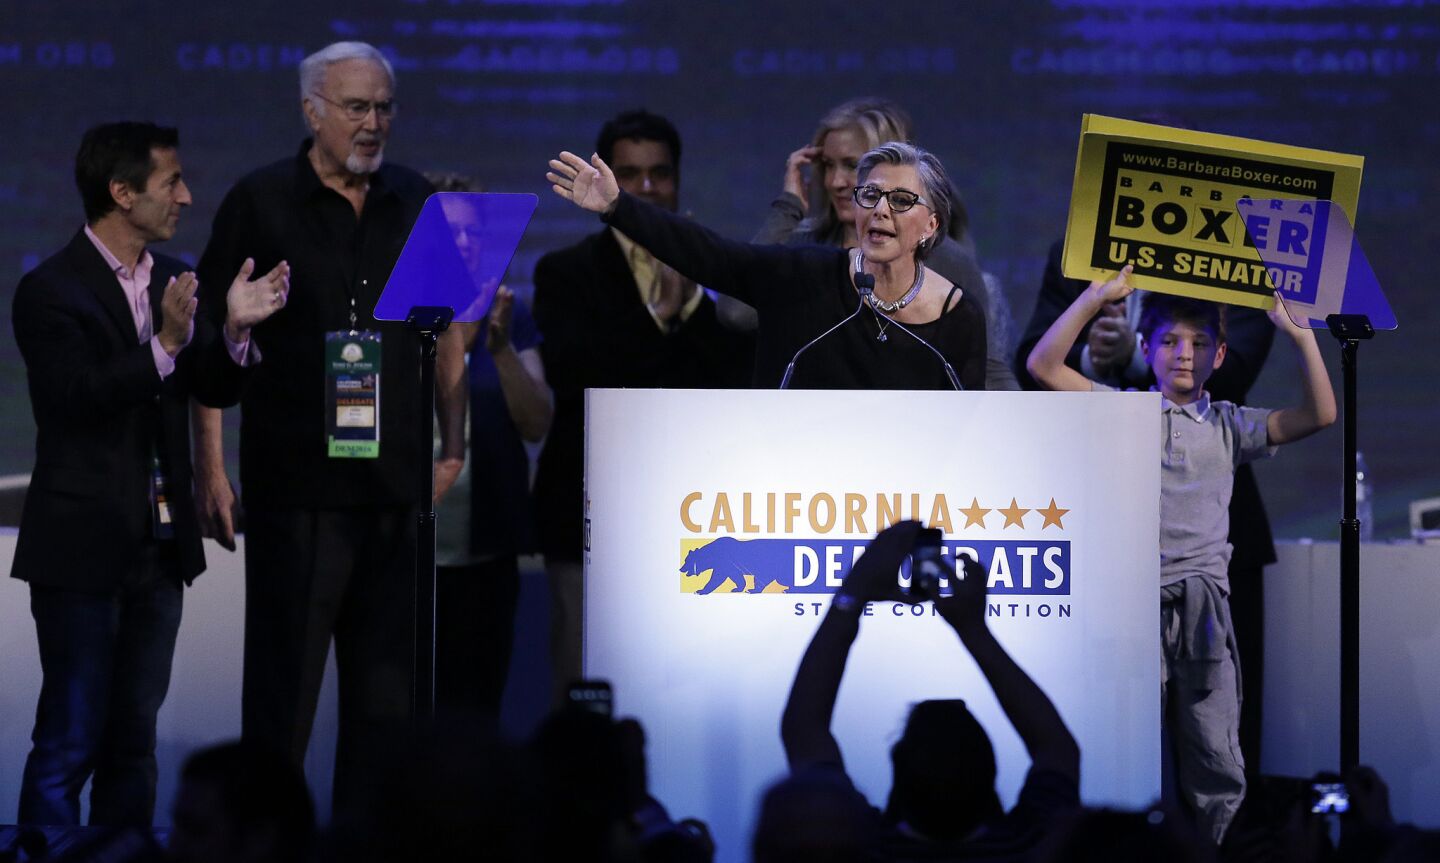 U.S. Sen. Barbara Boxer, D-Calif, center, waves after speaking before the California Democratic Party Convention on Saturday in San Jose.